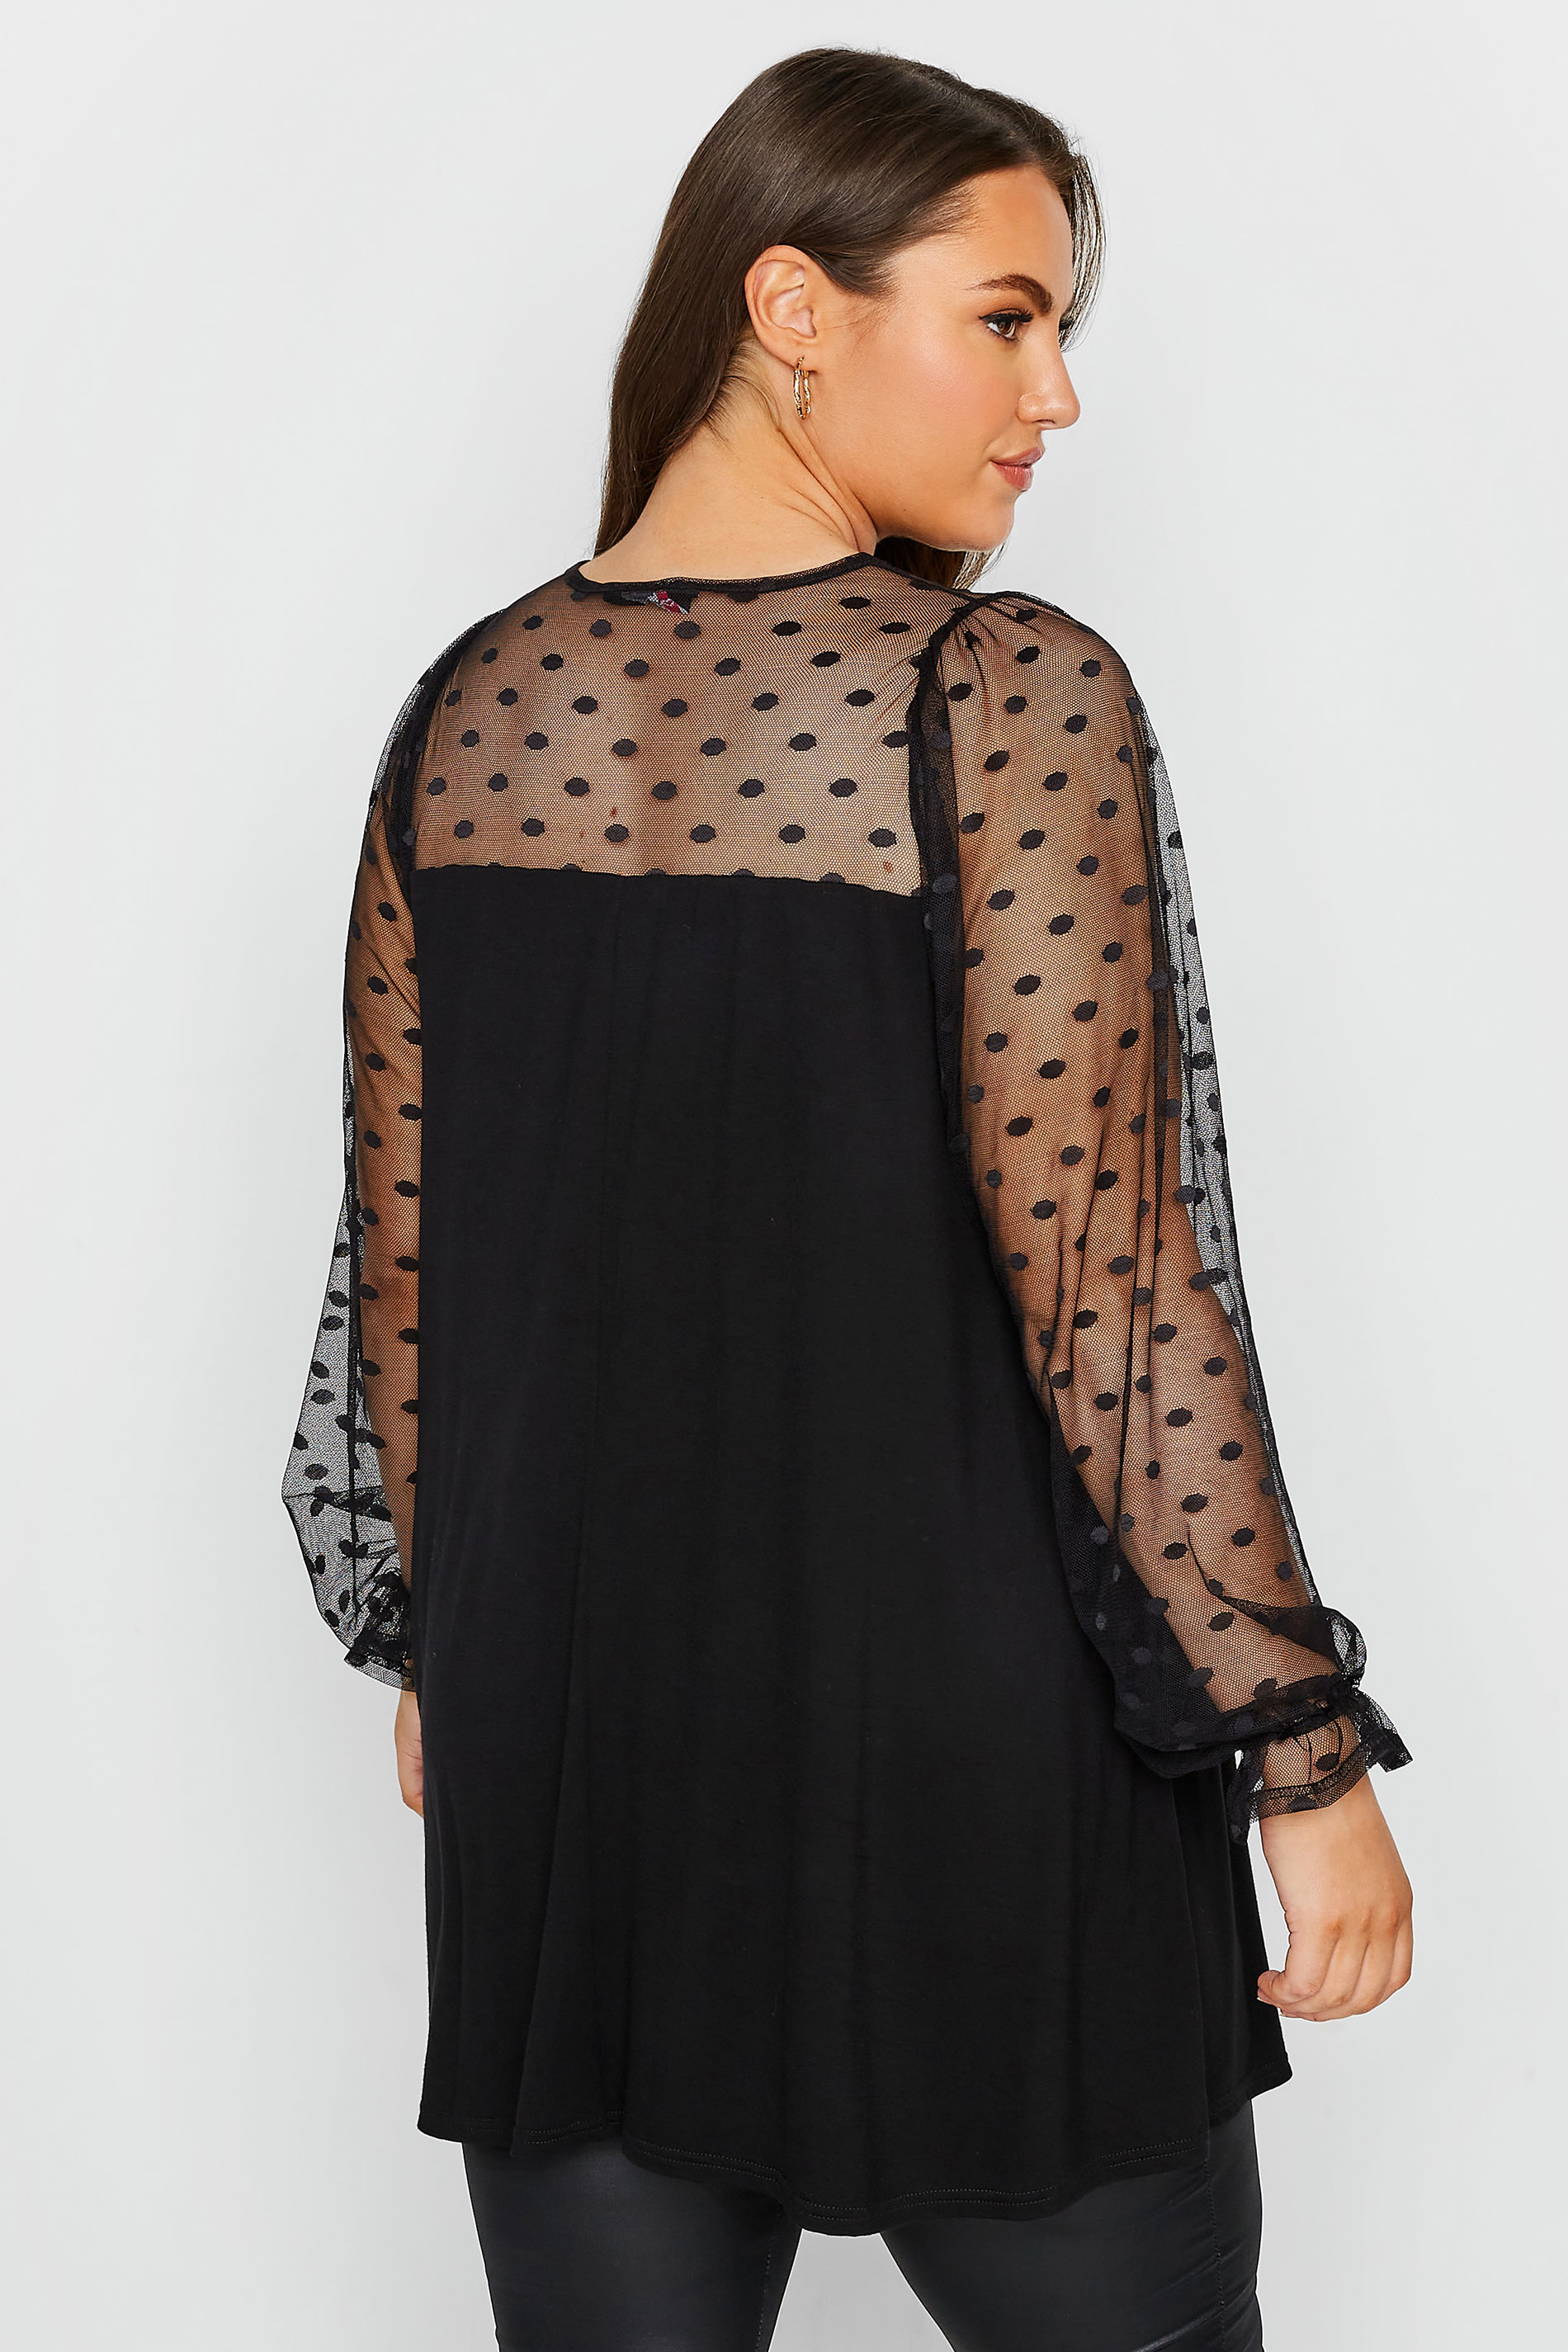 Curve Black Polka Dot Flocked Mesh Sleeve Top | Yours Clothing 3